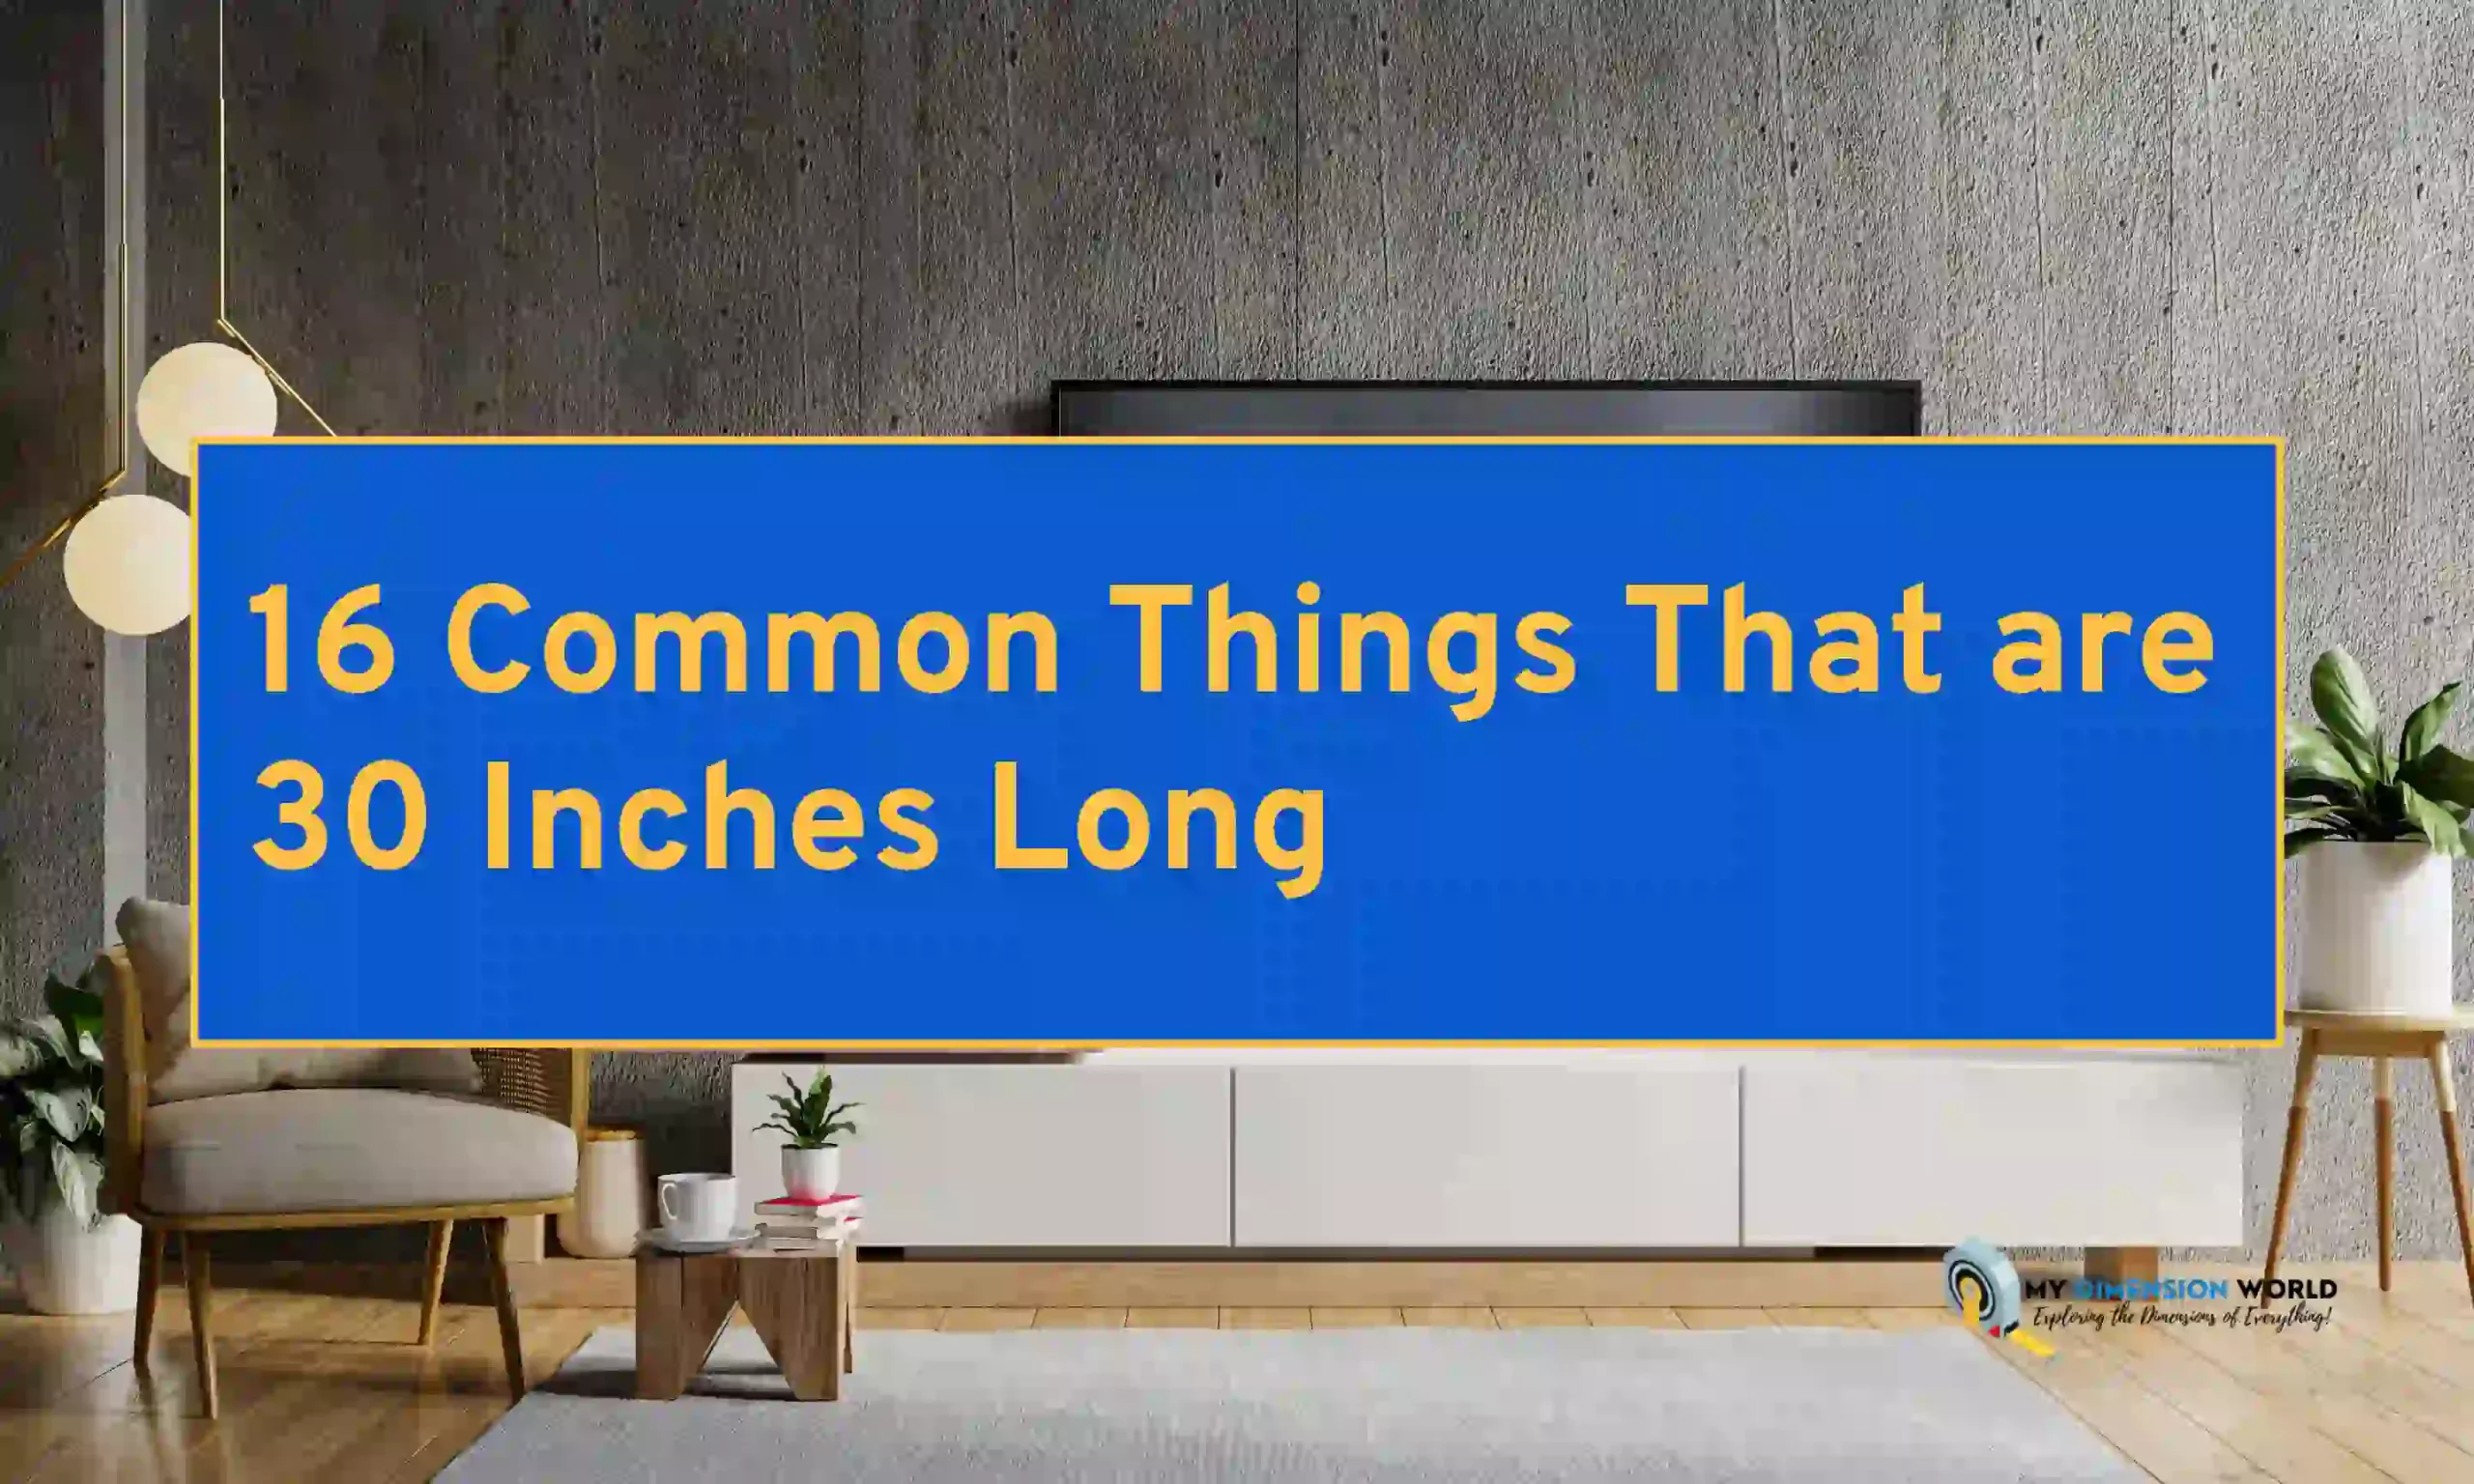 16 Common Things That are 30 Inches Long